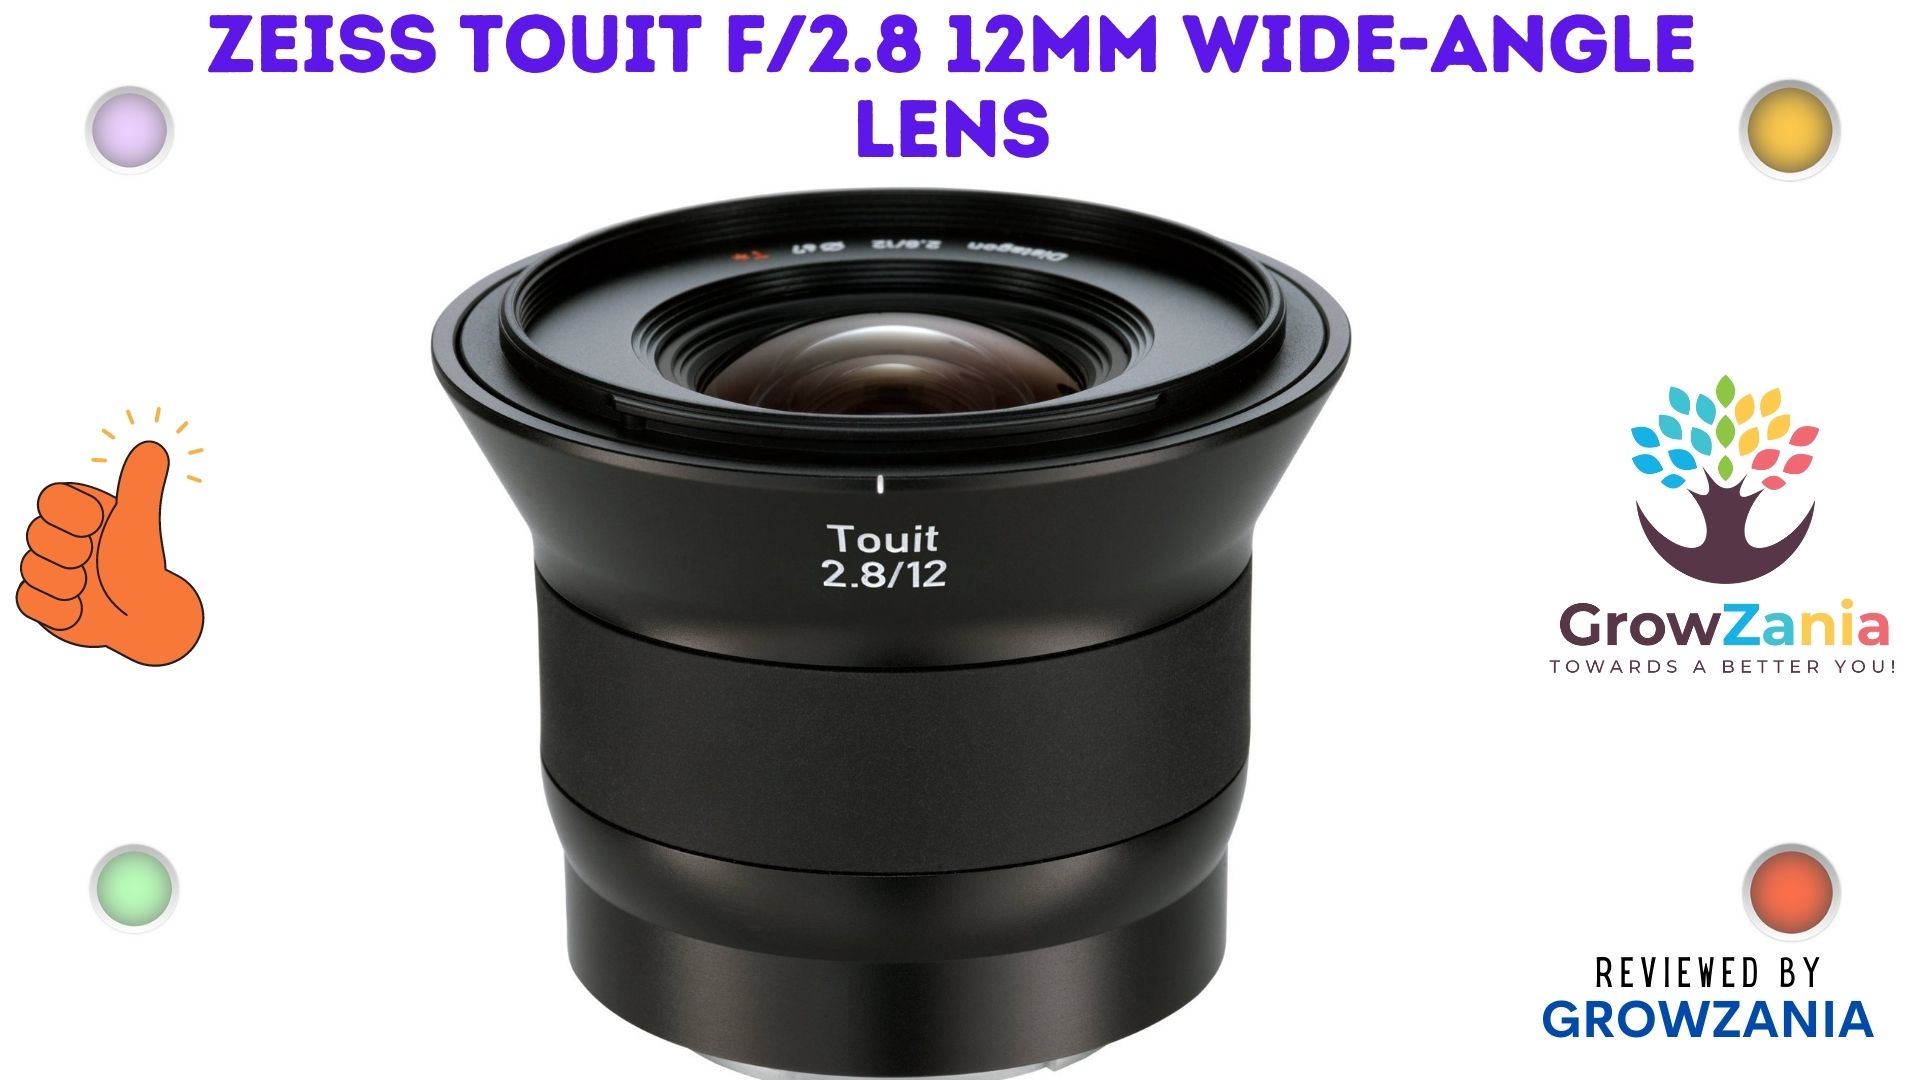 Zeiss Touit f/2.8 12mm Wide-Angle Lens